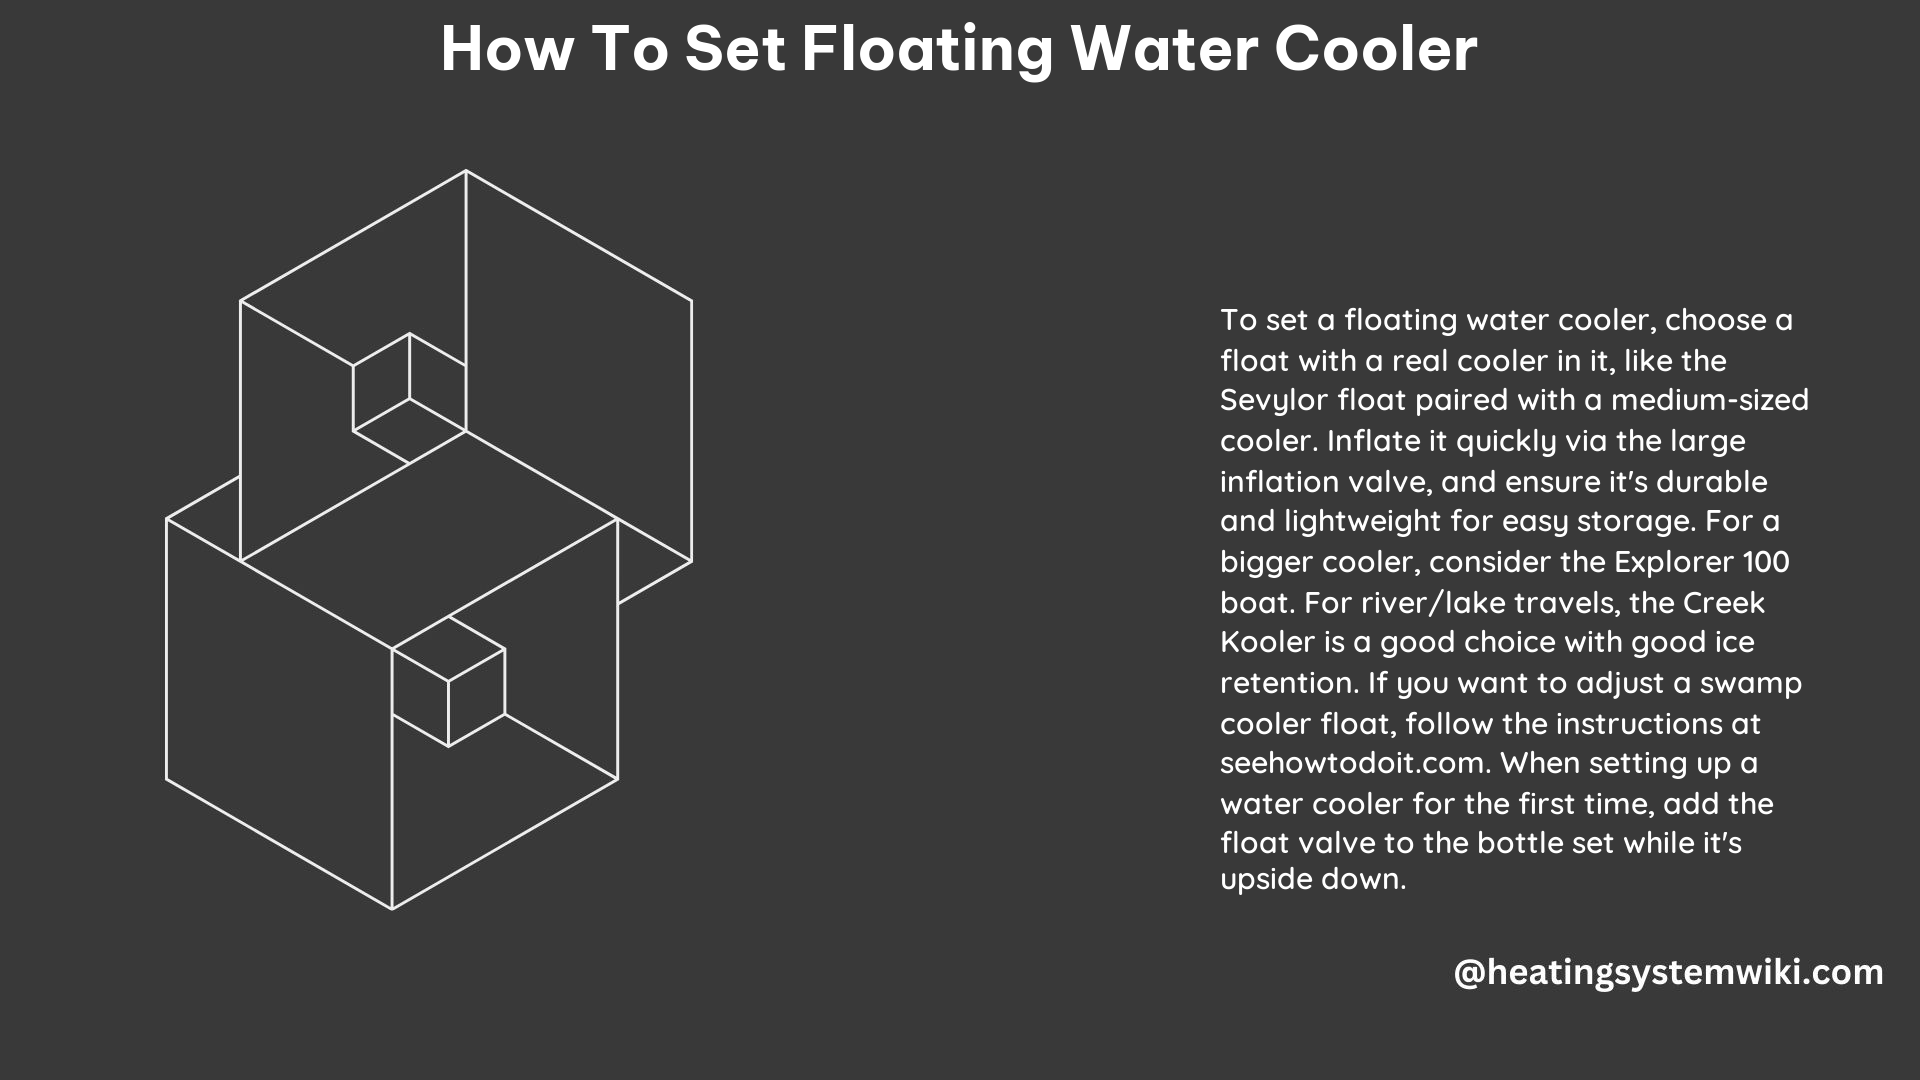 How to Set Floating Water Cooler